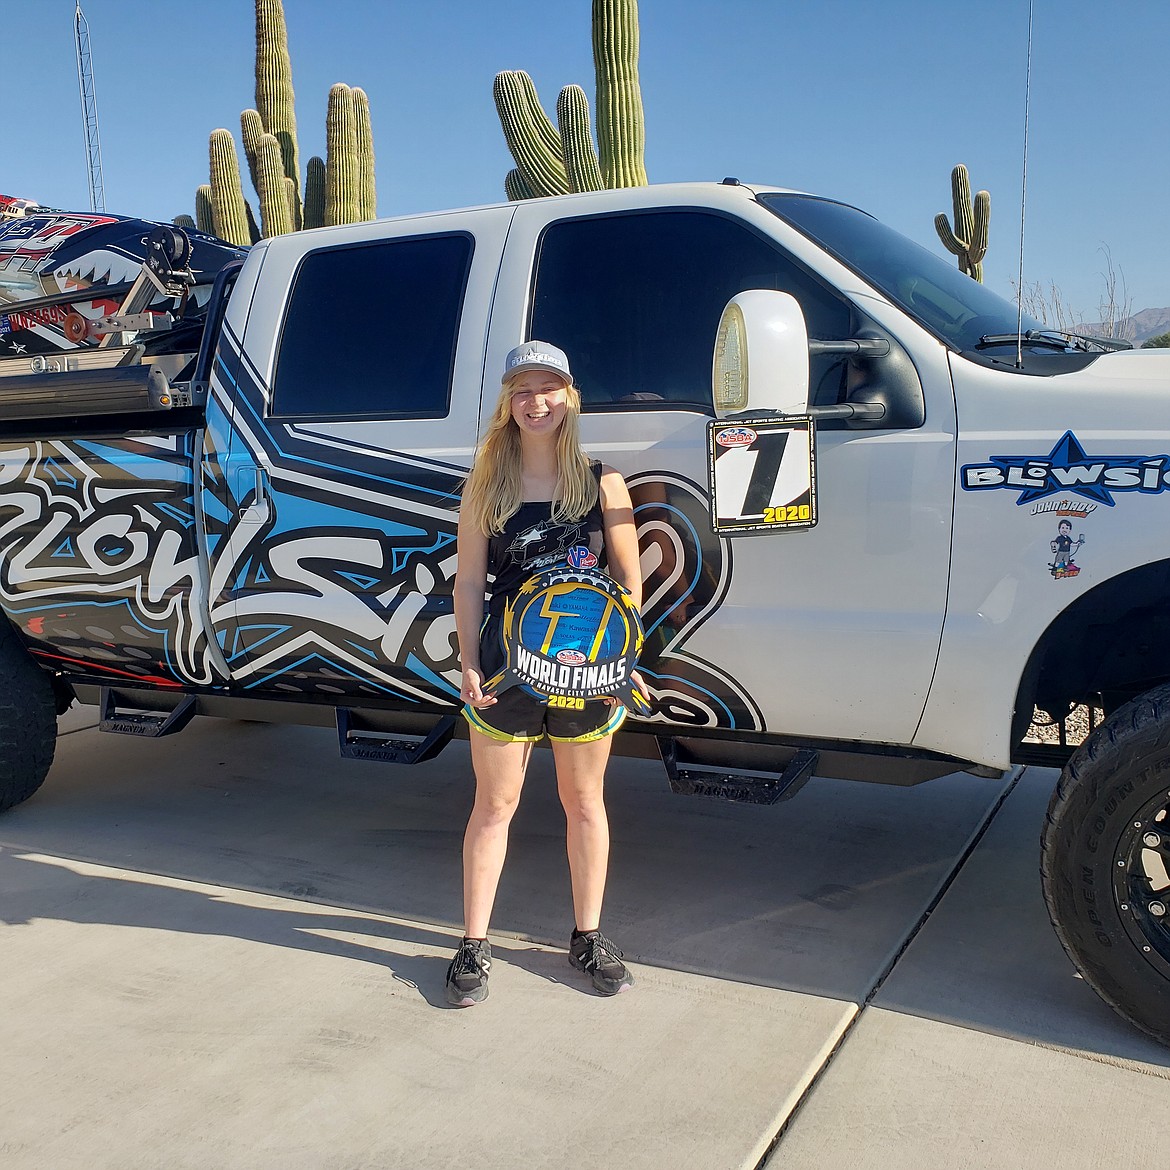 Courtesy photo
Alexandria Benson of Hayden Lake with her world championship trophy following her win in the International Jet Sports Boating Association VP Racing World Finals on Oct. 10 in Lake Havasu, Ariz.